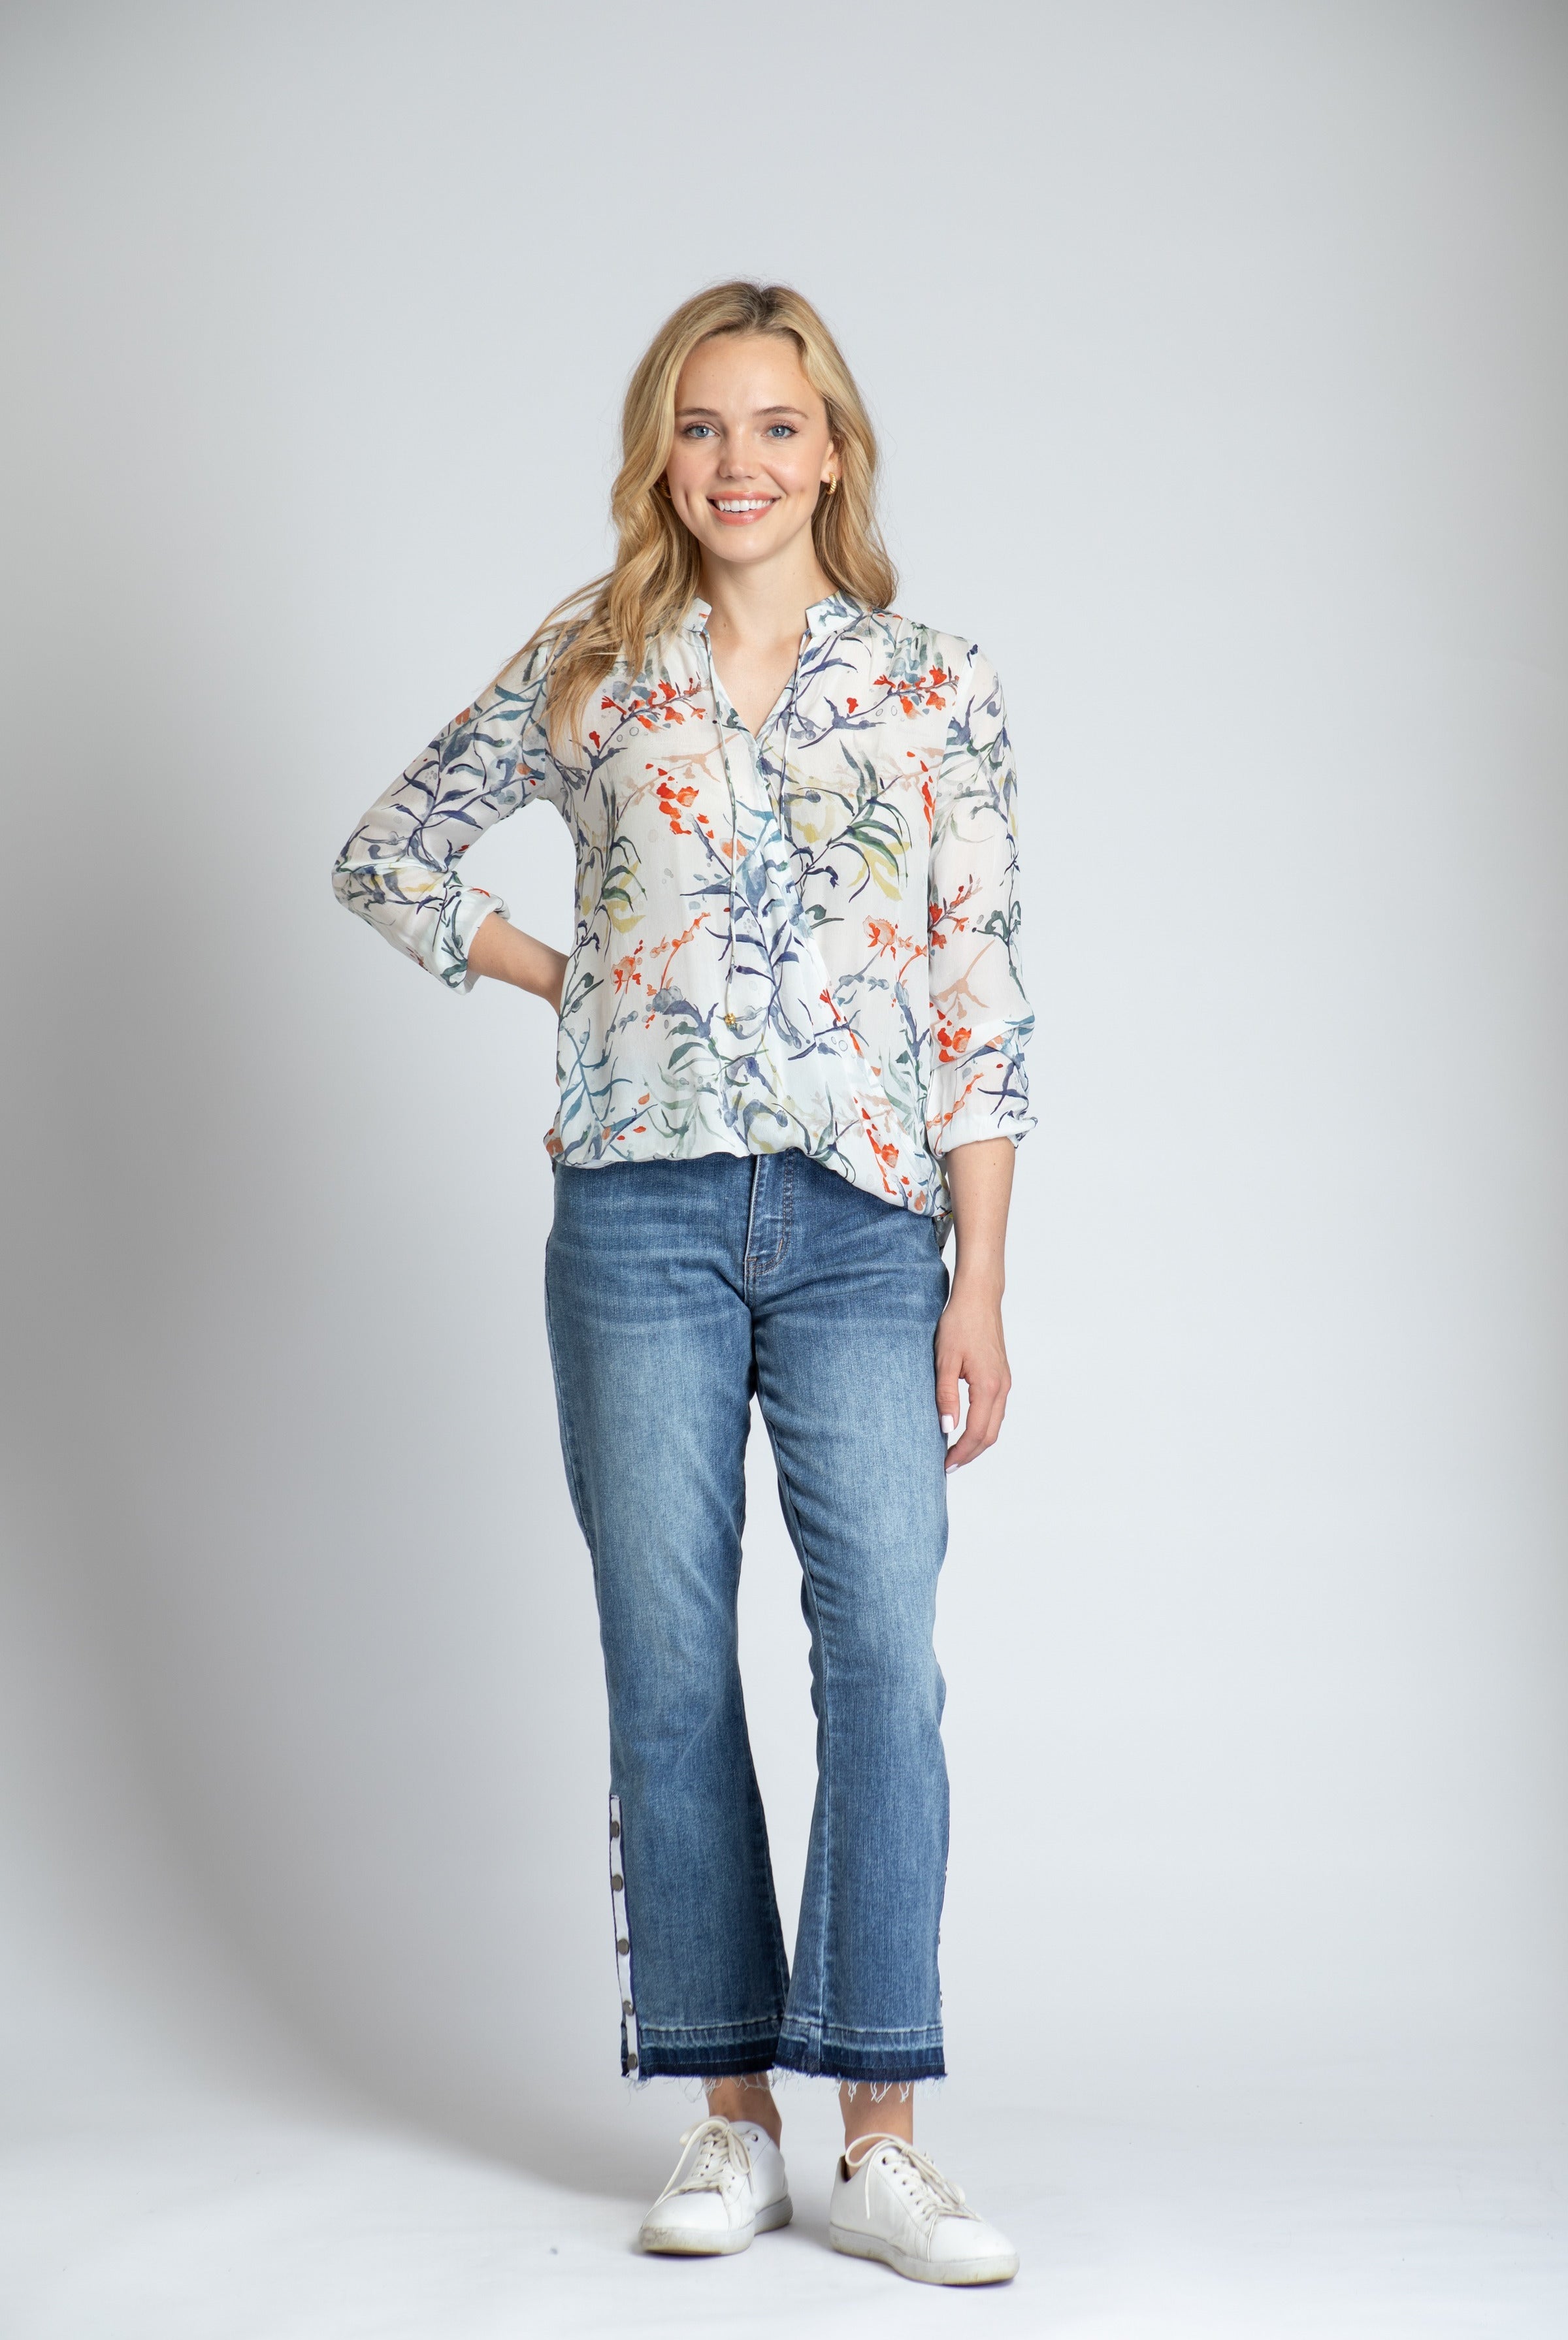  Botanical Print - Crossover Top With Tassel